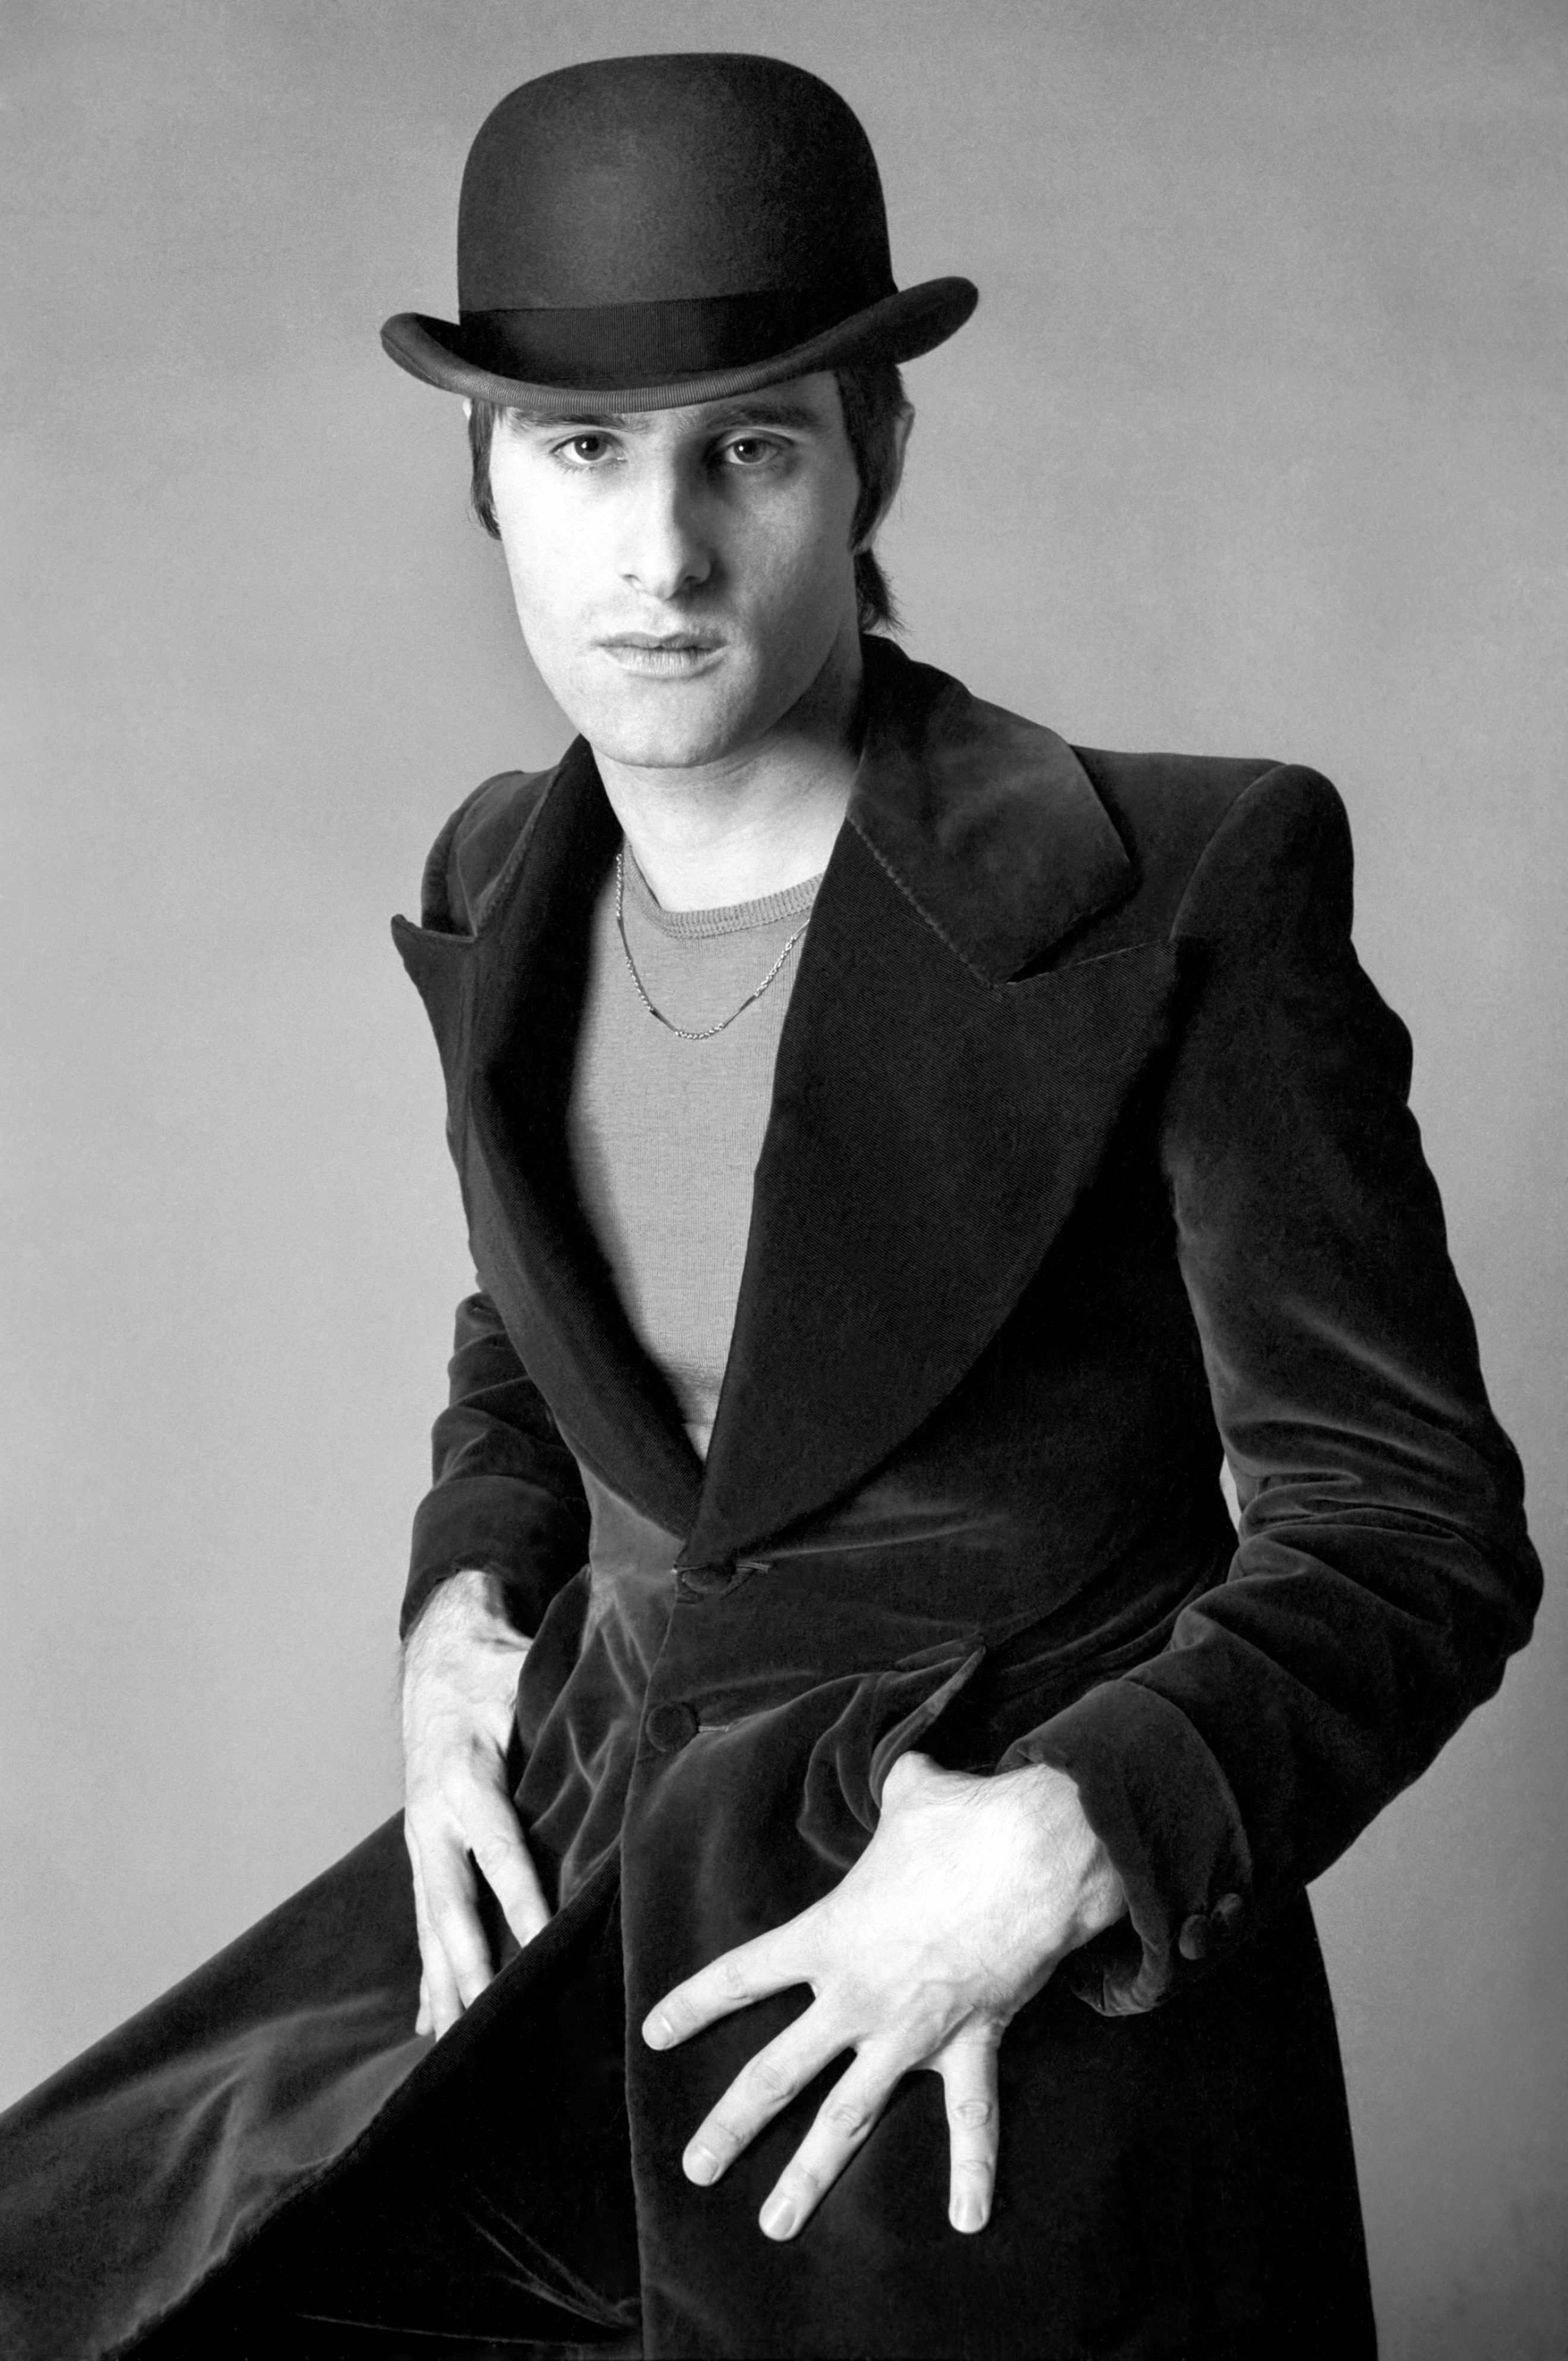 Steve Harley shot to fame with Cockney Rebel in the 1970s